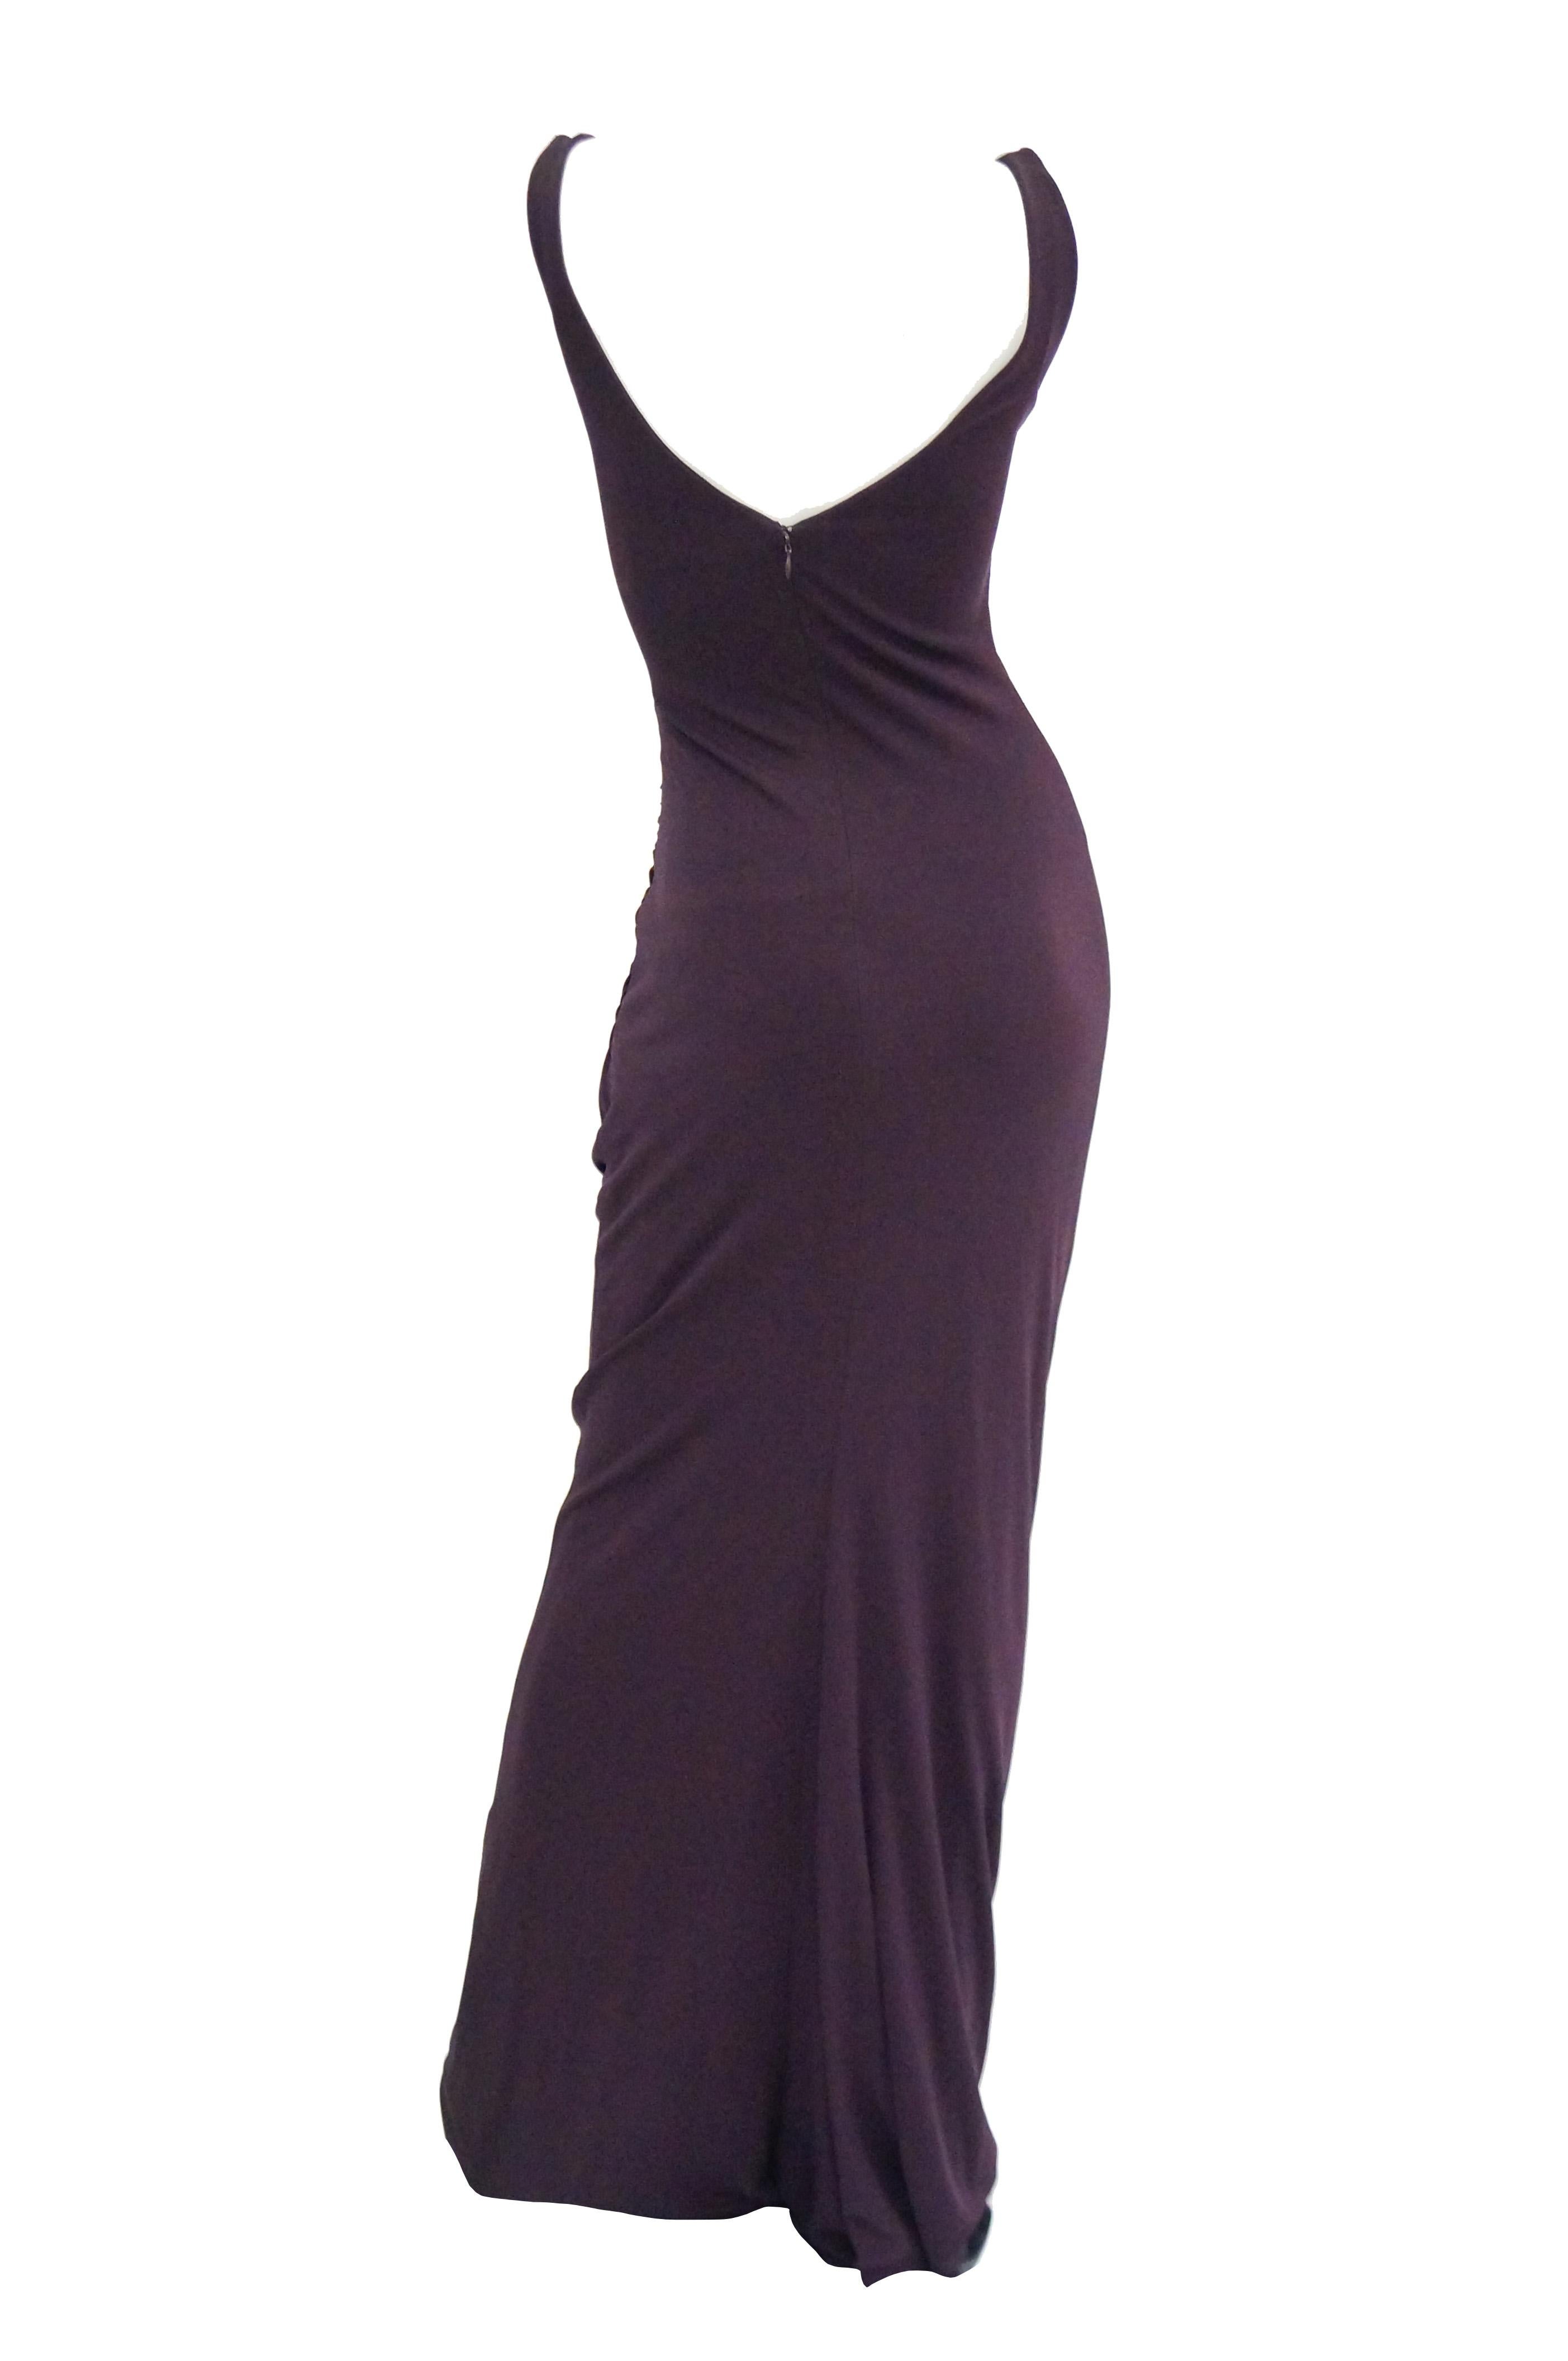 Striking evening dress by Donald Deal. This maxi length evening dress is maxi length, sleeveless with wide straps, a v - neck, and a low back. The body conforming dress is color blocked, with a panel of deep ginger orange at the front waist. The